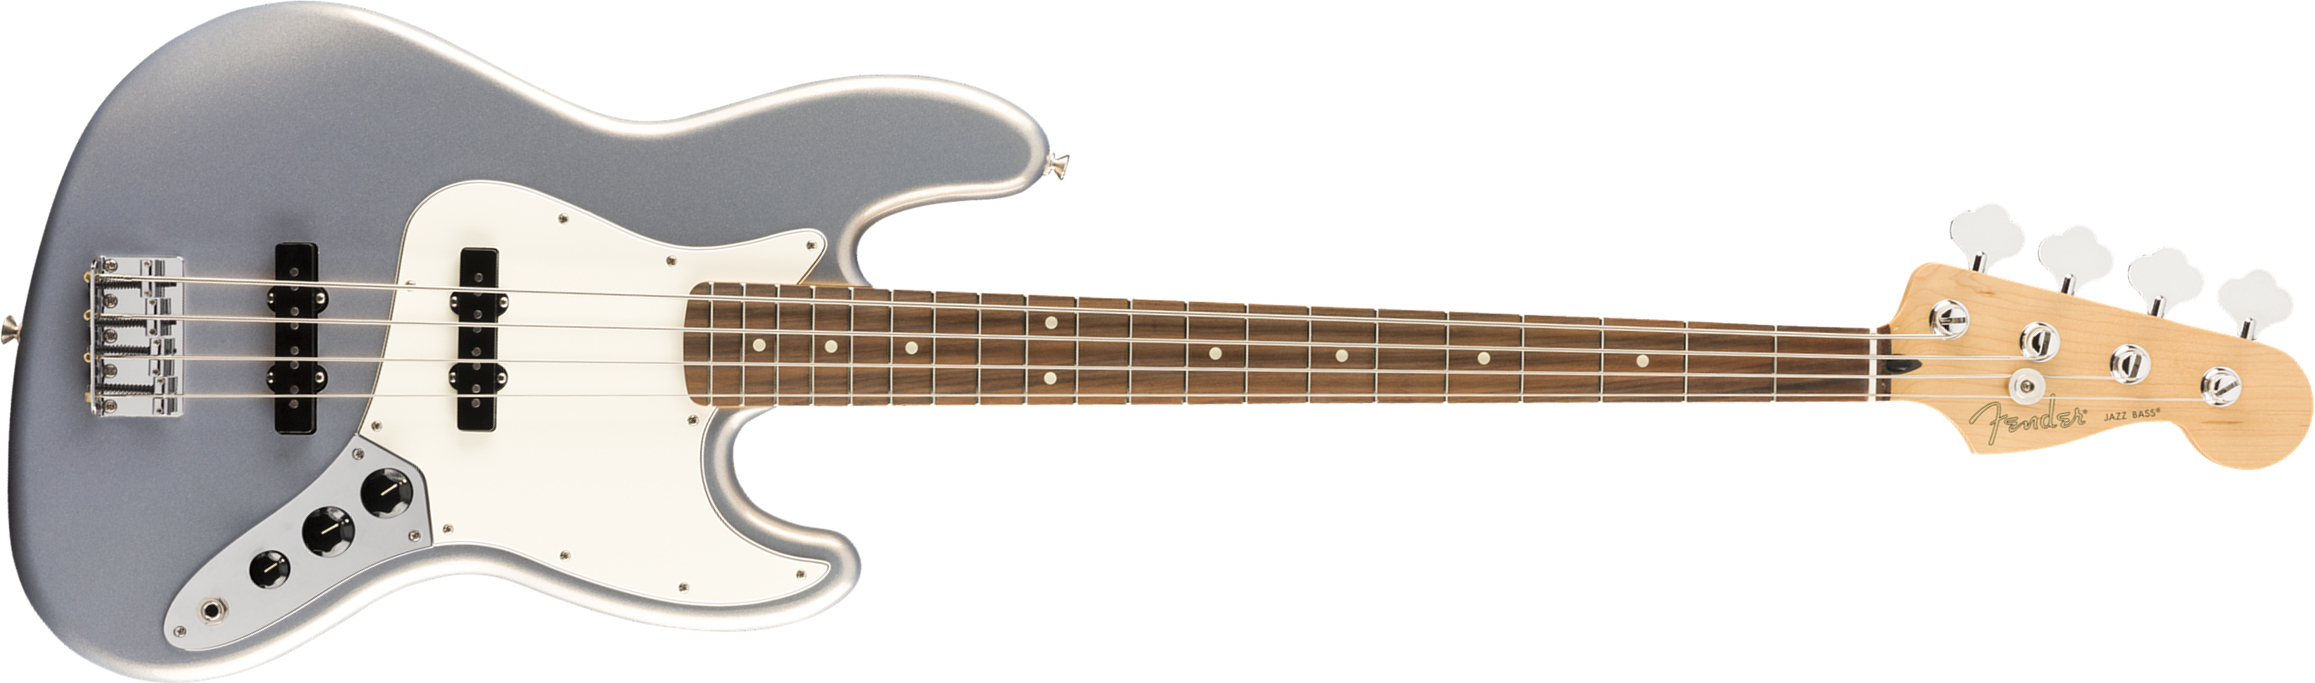 Fender Jazz Bass Player Mex Pf - Silver - Solidbody E-bass - Main picture